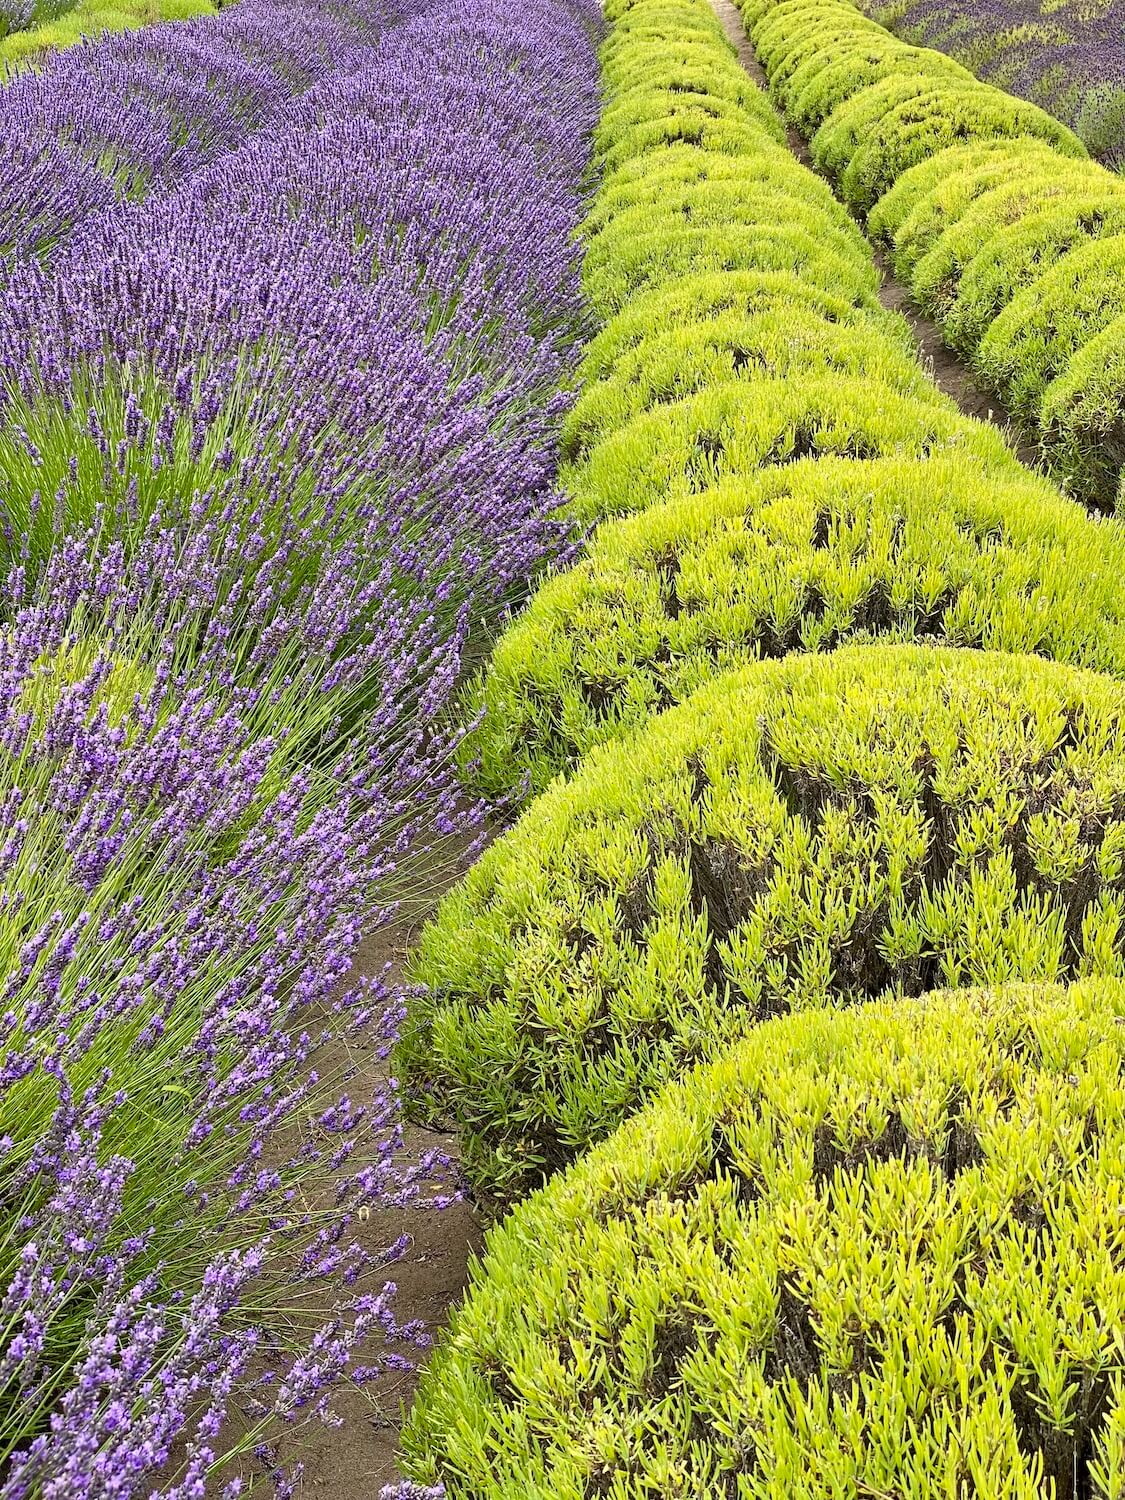 Lavender fields offer a look at different varieties of the plants. Two rows are a bright lime green while two more have sprouts of the purple flowers pushing out on green stalks.